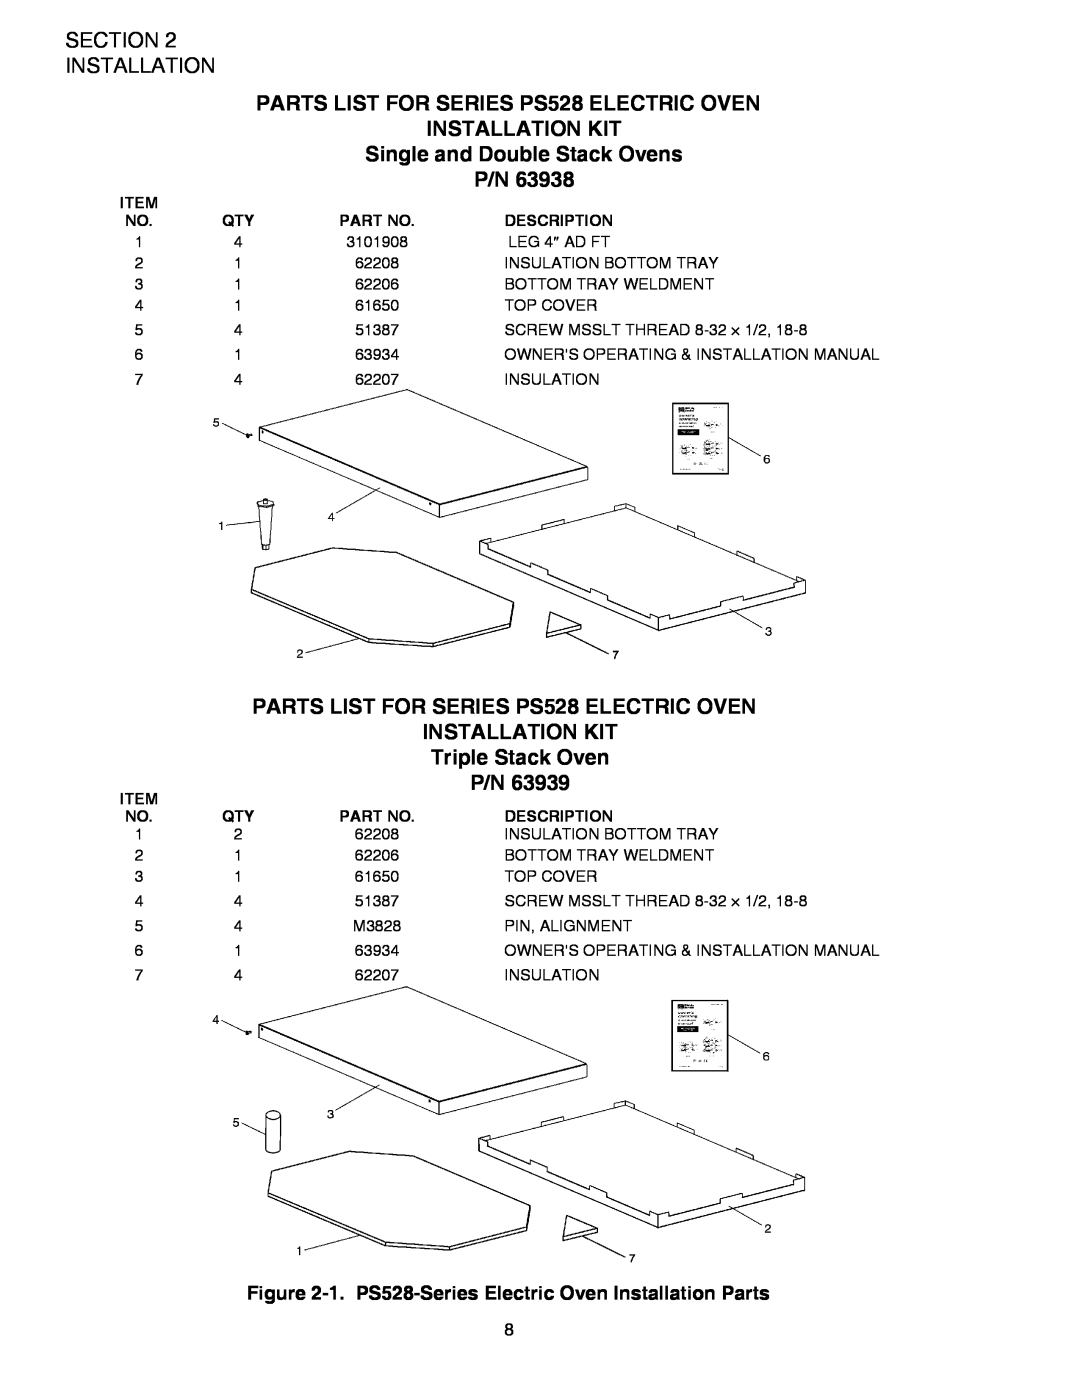 Middleby Marshall PS528E PARTS LIST FOR SERIES PS528 ELECTRIC OVEN INSTALLATION KIT, Single and Double Stack Ovens P/N 